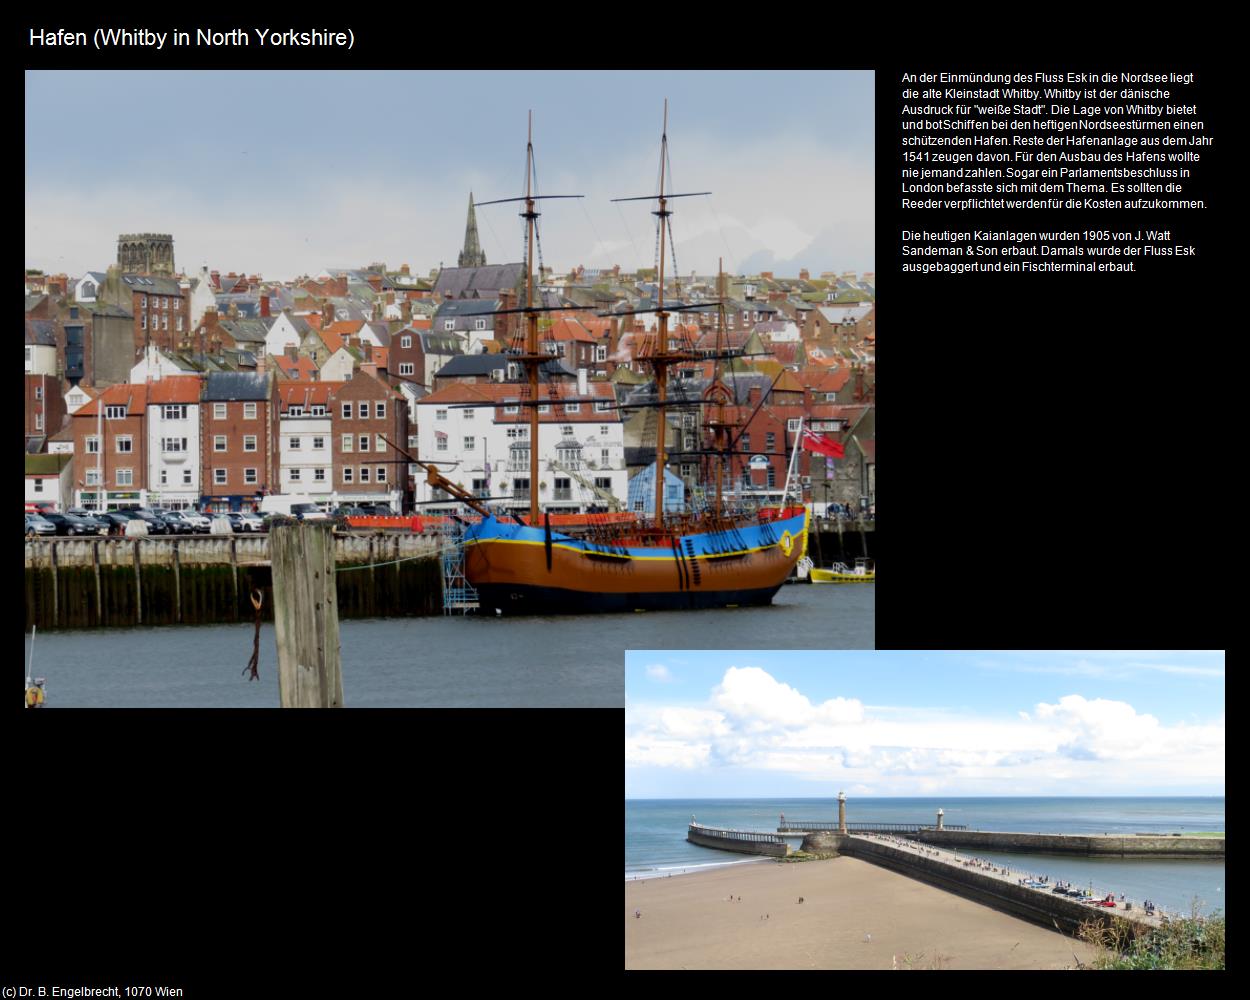 Hafen (Whitby in North Yorkshire, England  ) in Kulturatlas-ENGLAND und WALES